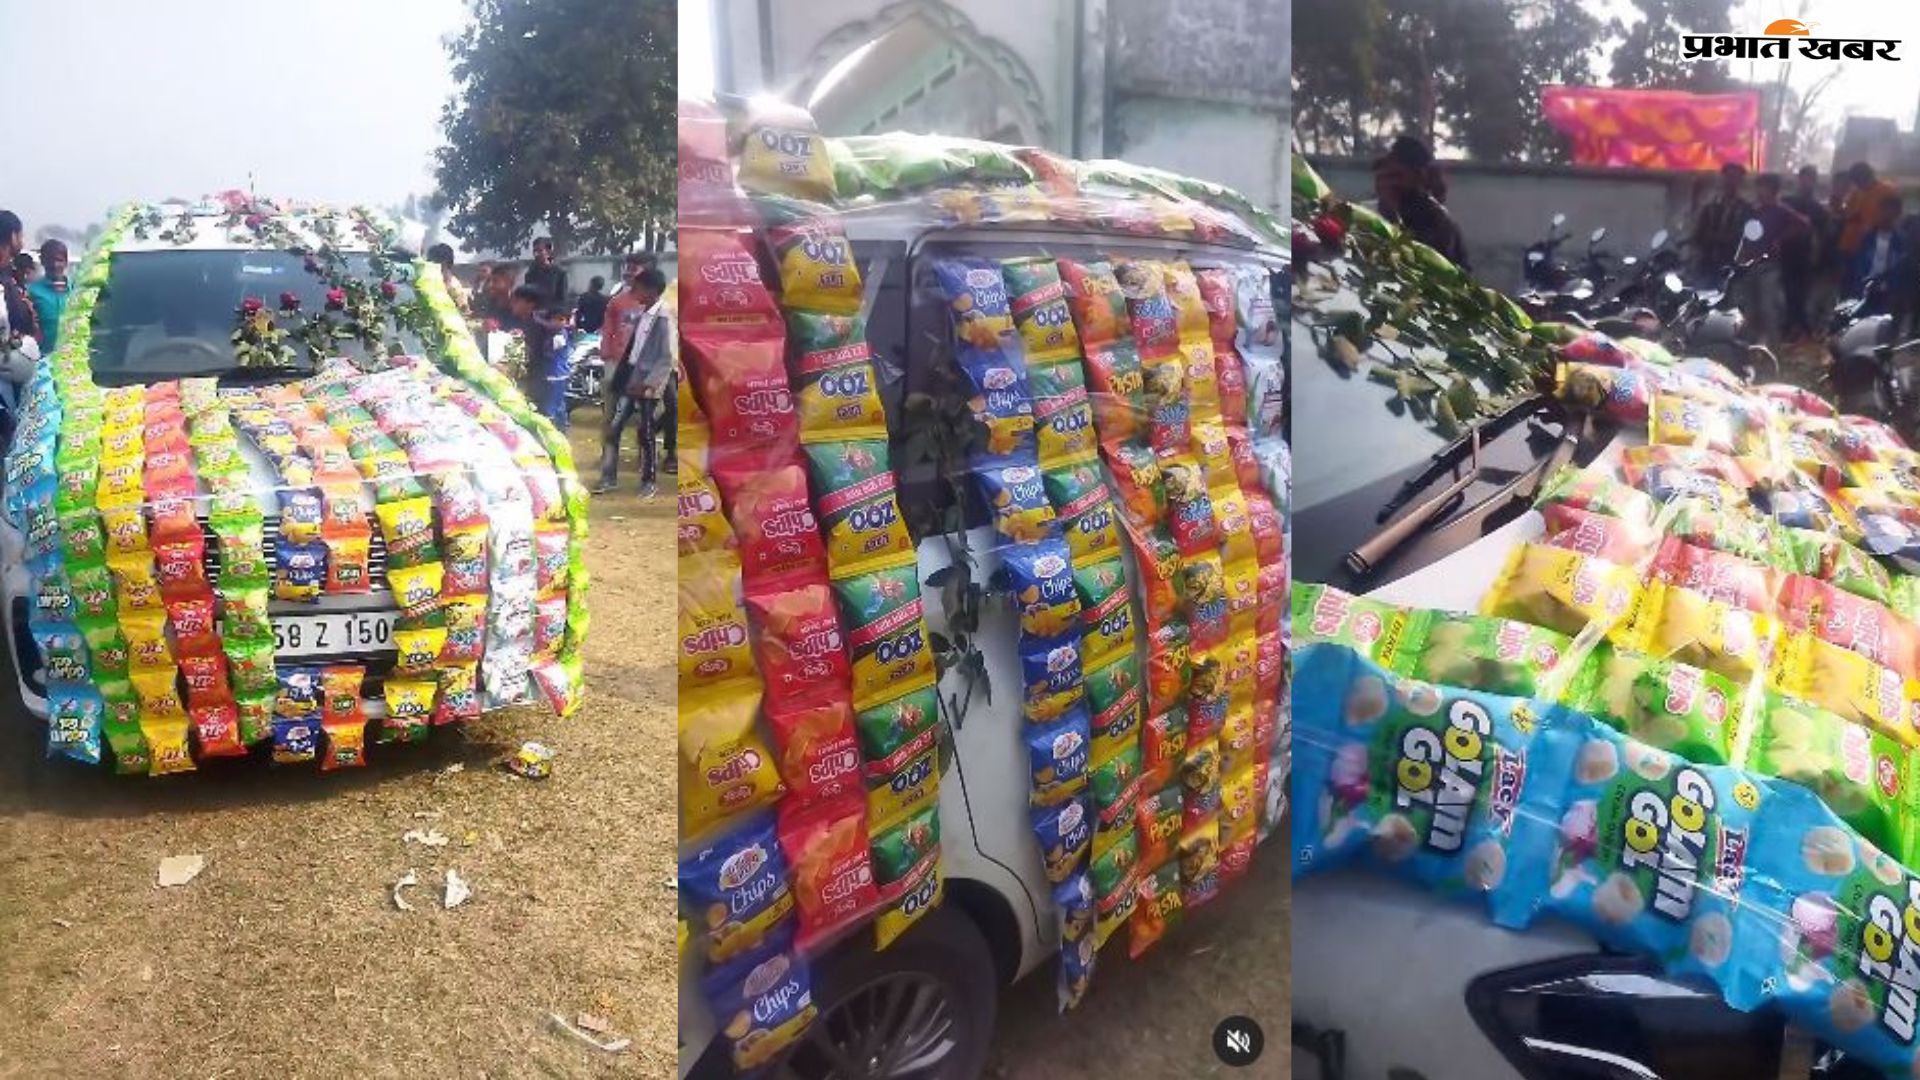 Bizarre News: Groom's car turned into a chips and crisps shop